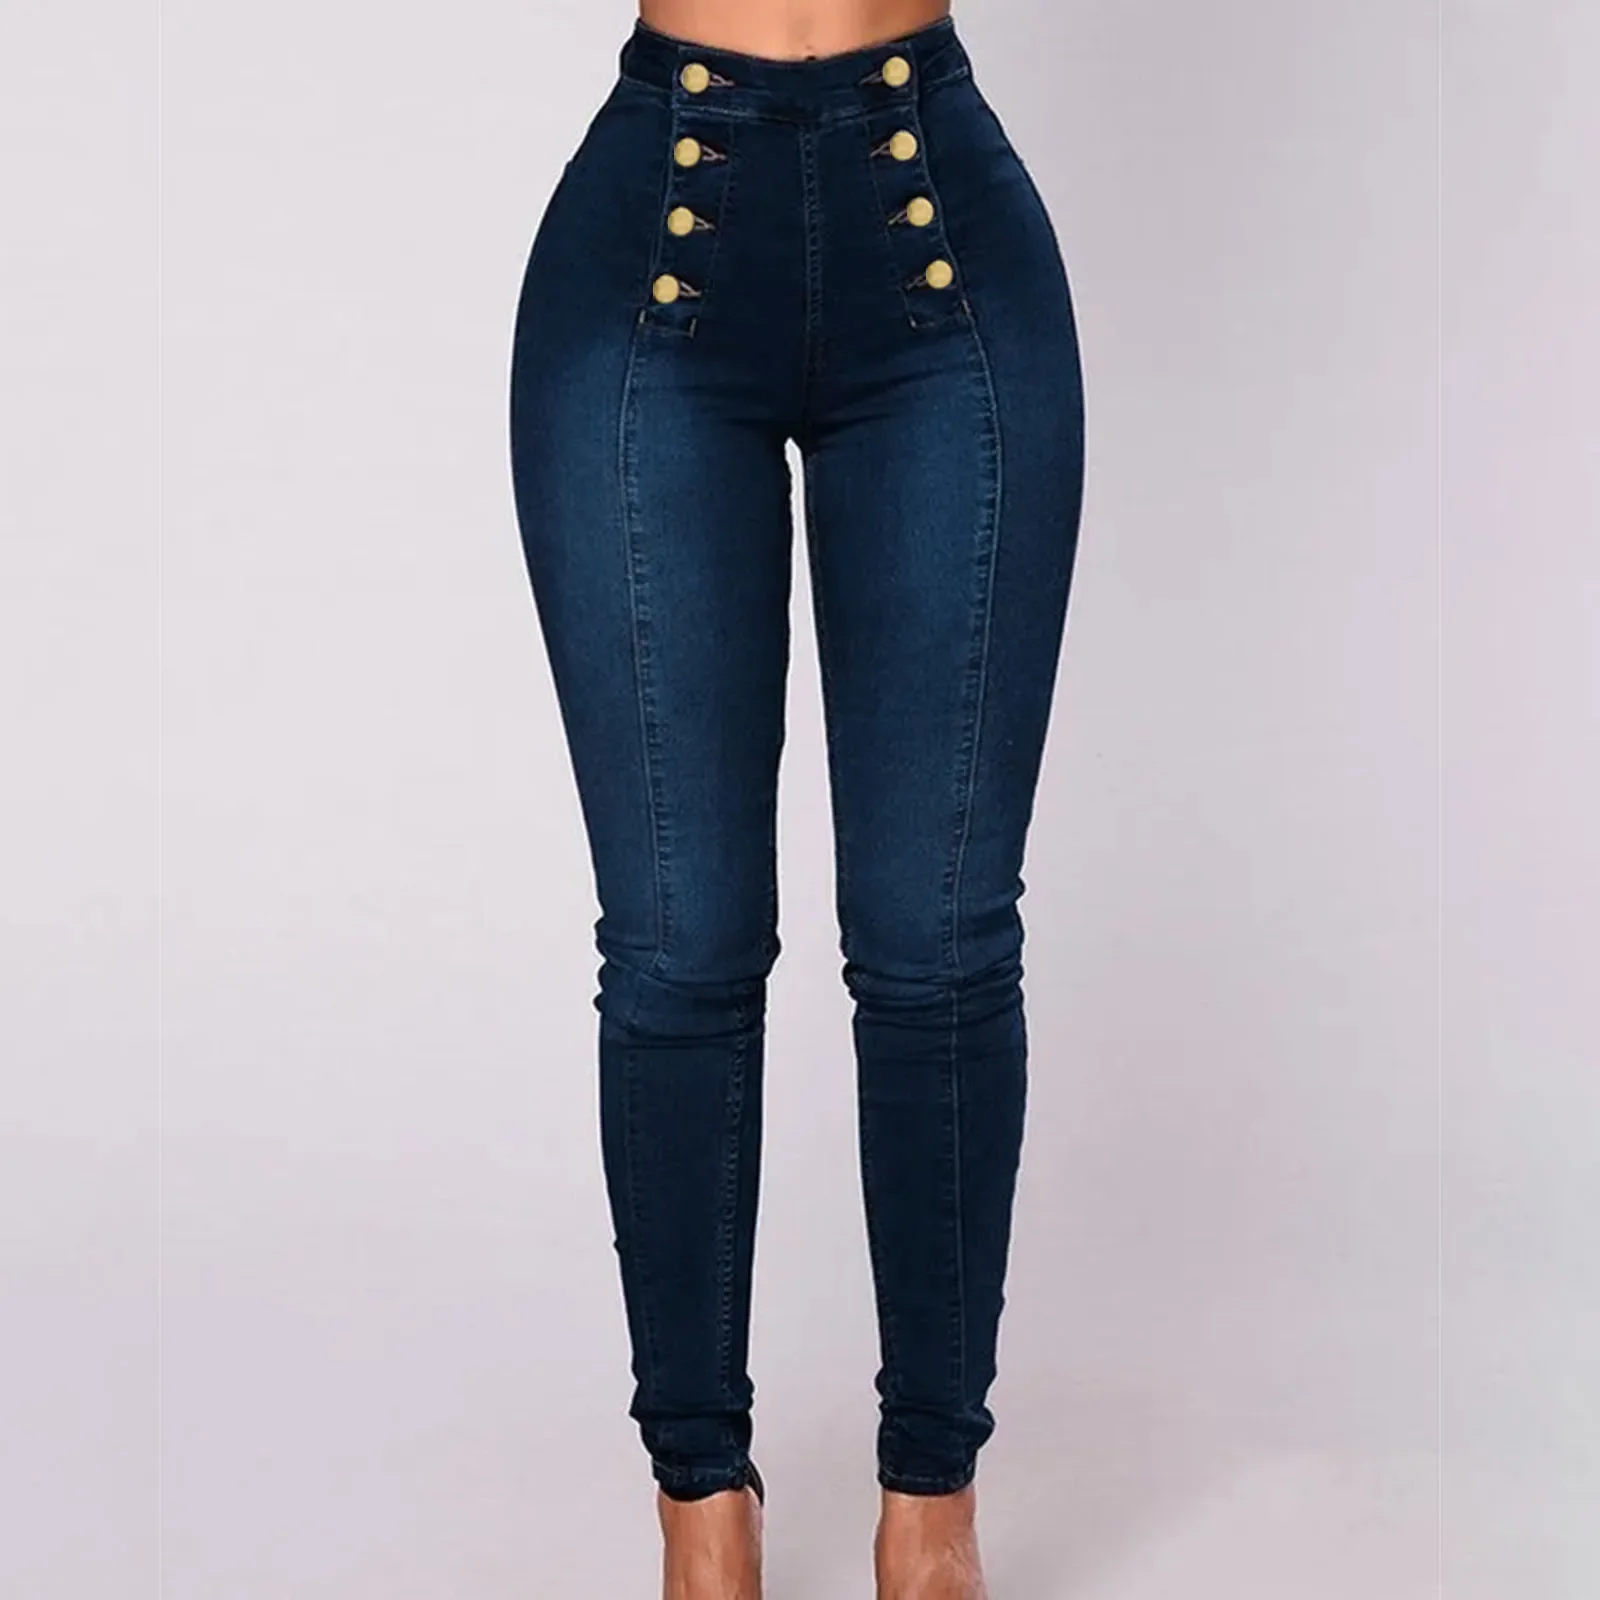 Denim Trousers Elastic High Waist Casual Jeans Trendy Double Breasted Multi Button Slim Skinny Jeans Ankle-Length Denim Pants high waist jeans women autumn invisible open crotch outdoor sex plus size slimming stretch skinny straight ankle denim trousers